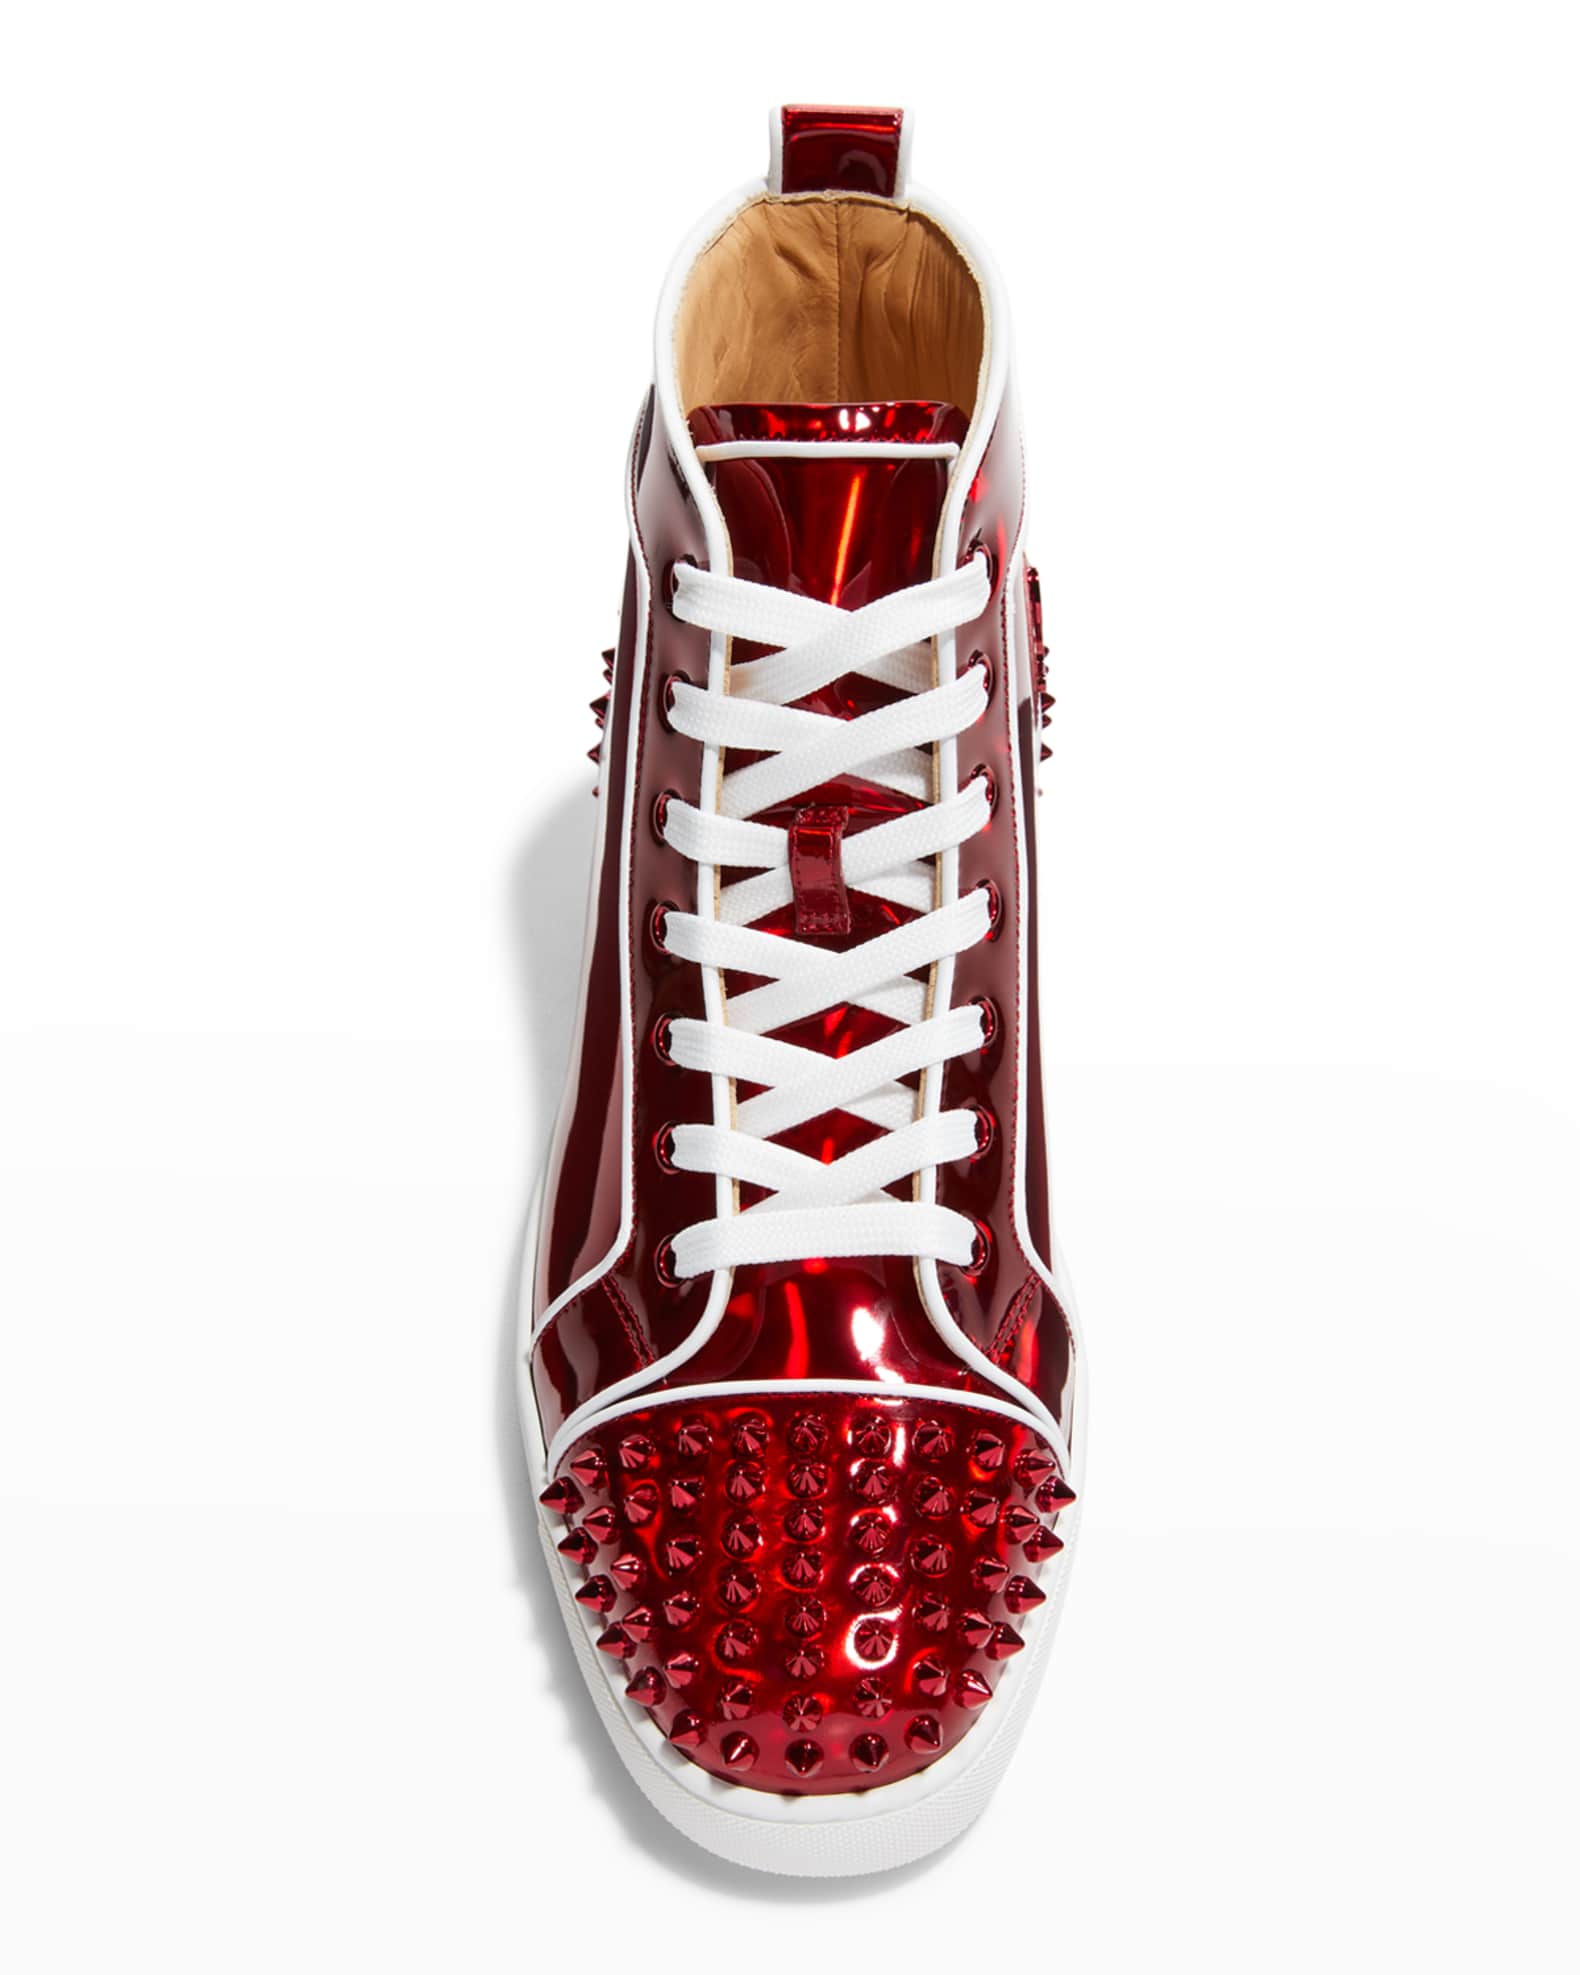 Christian Louboutin FUN LOUIS Comic Patent Leather High Top Sneakers Shoes  $1095